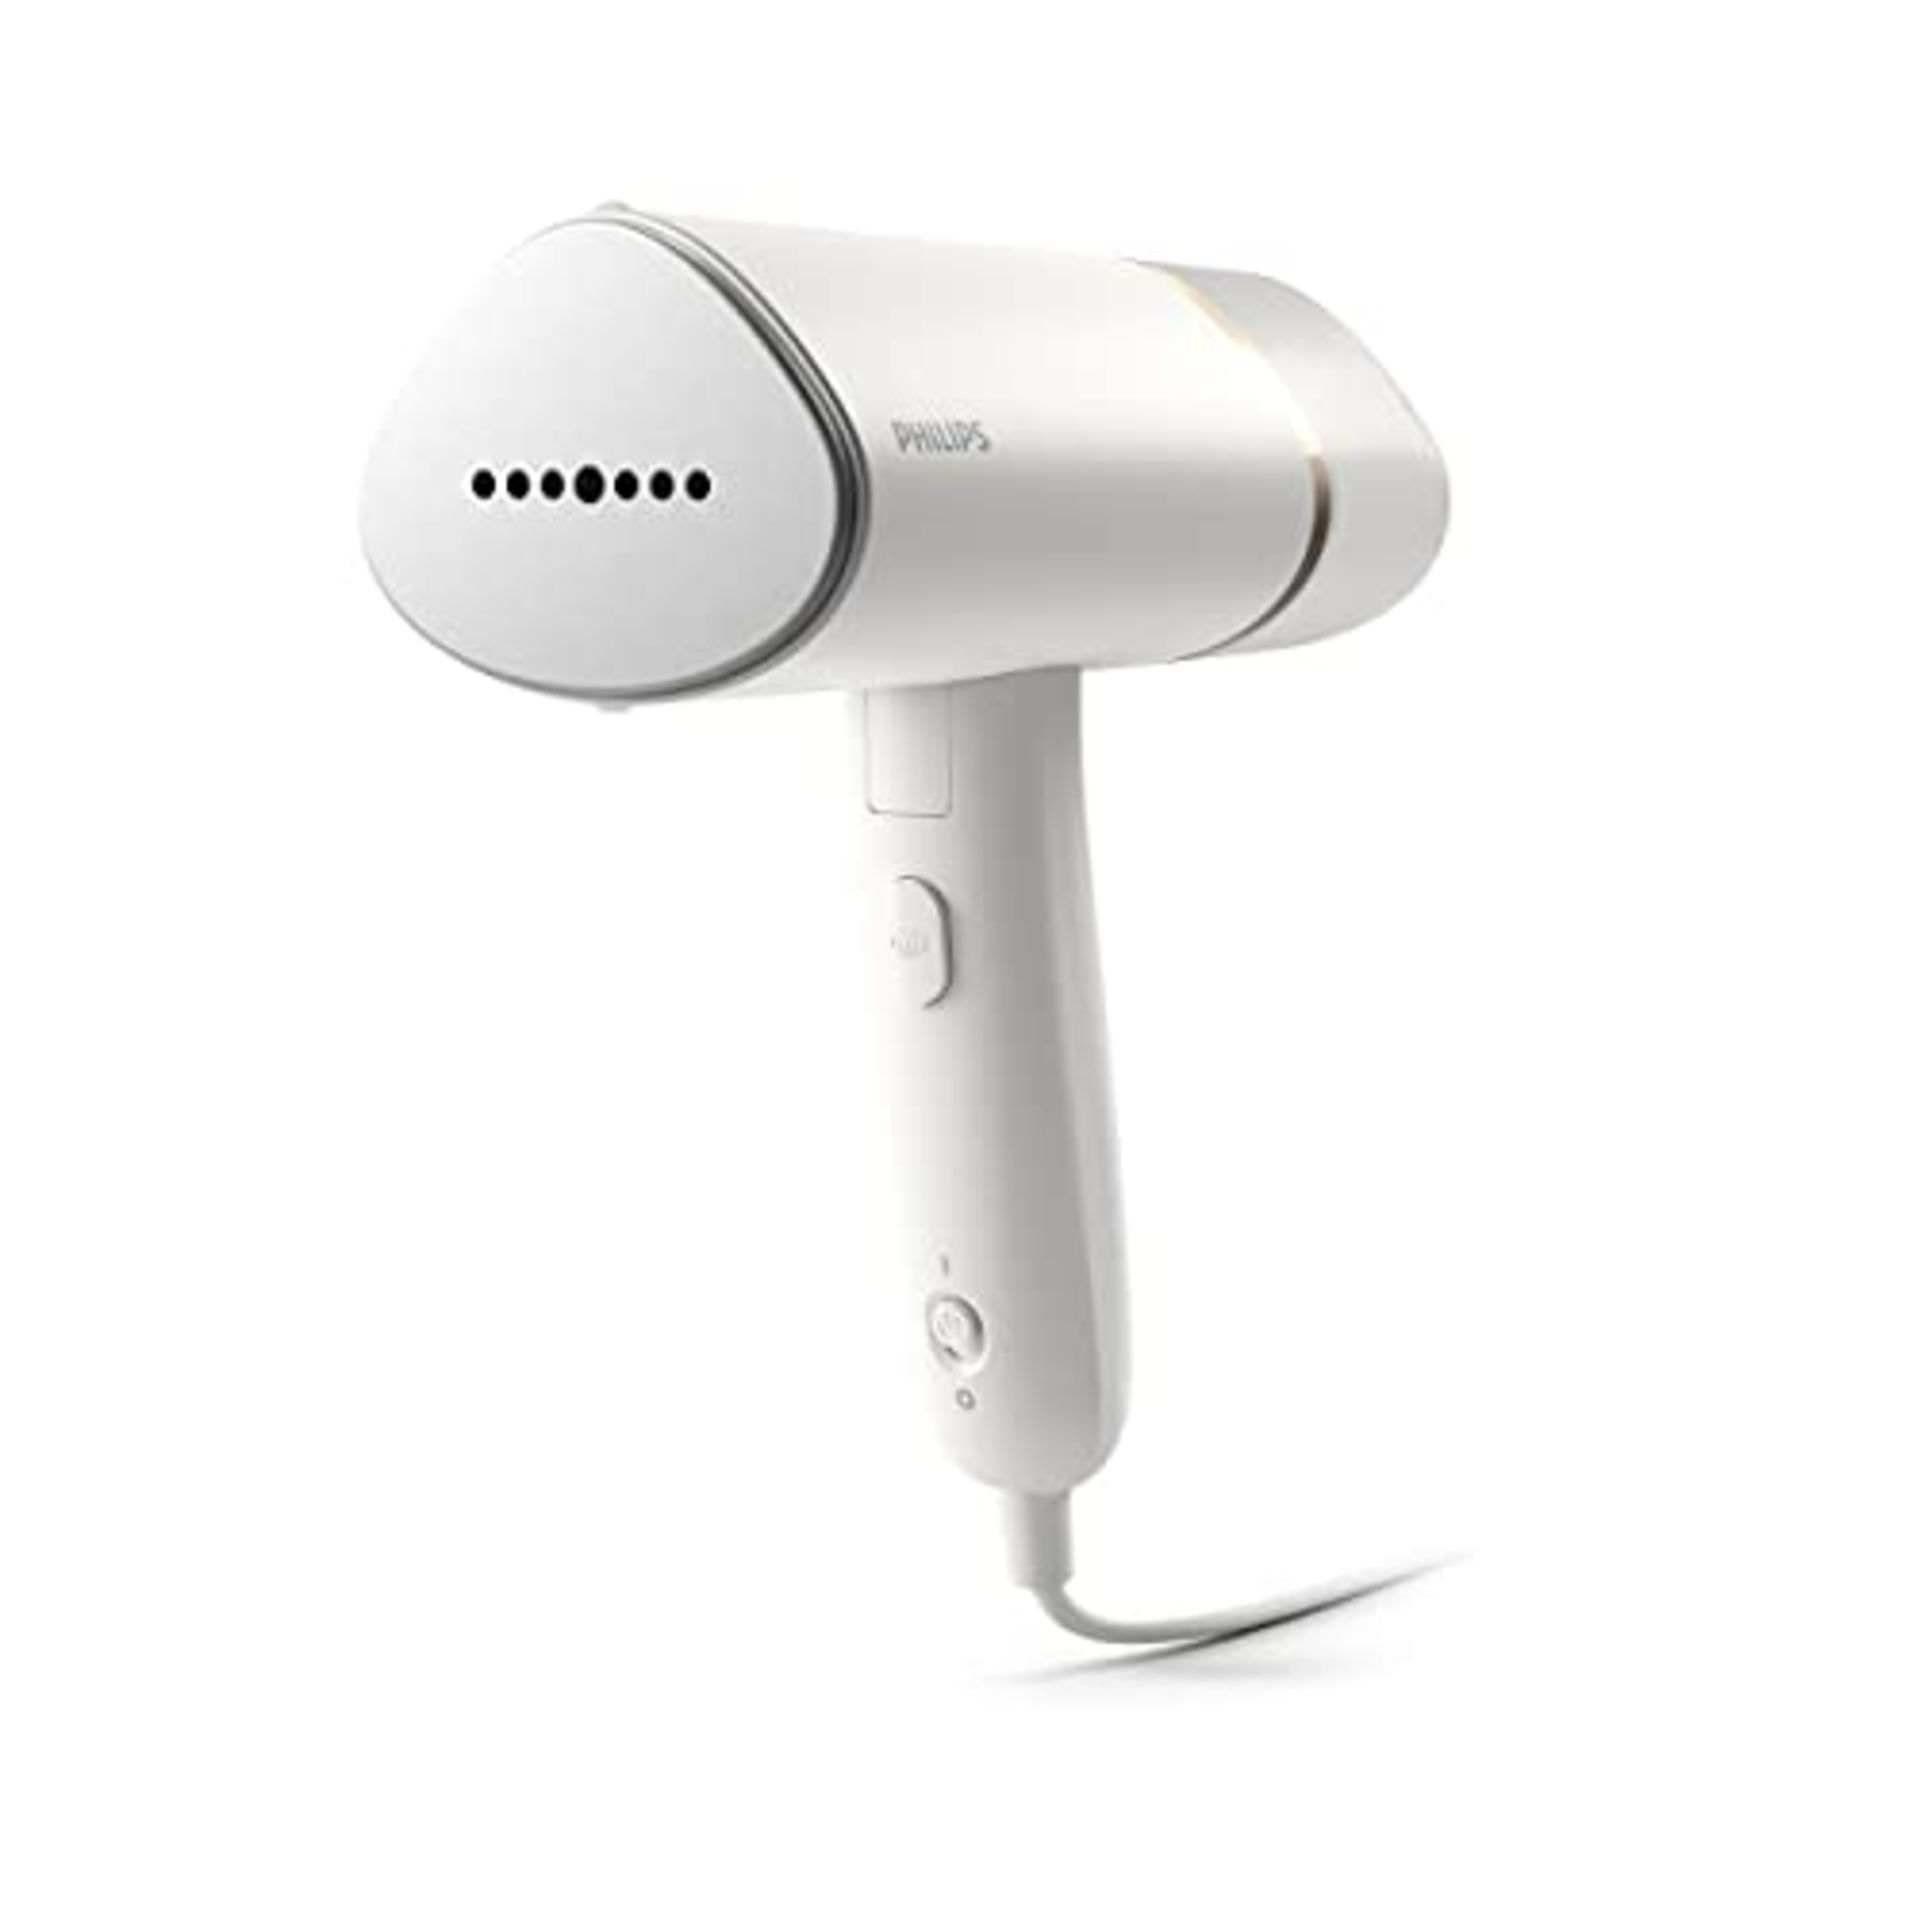 Philips Handheld Steamer 3000 Series, Compact and Foldable, Ready to Use in Ëœ30 Seconds, No Iron